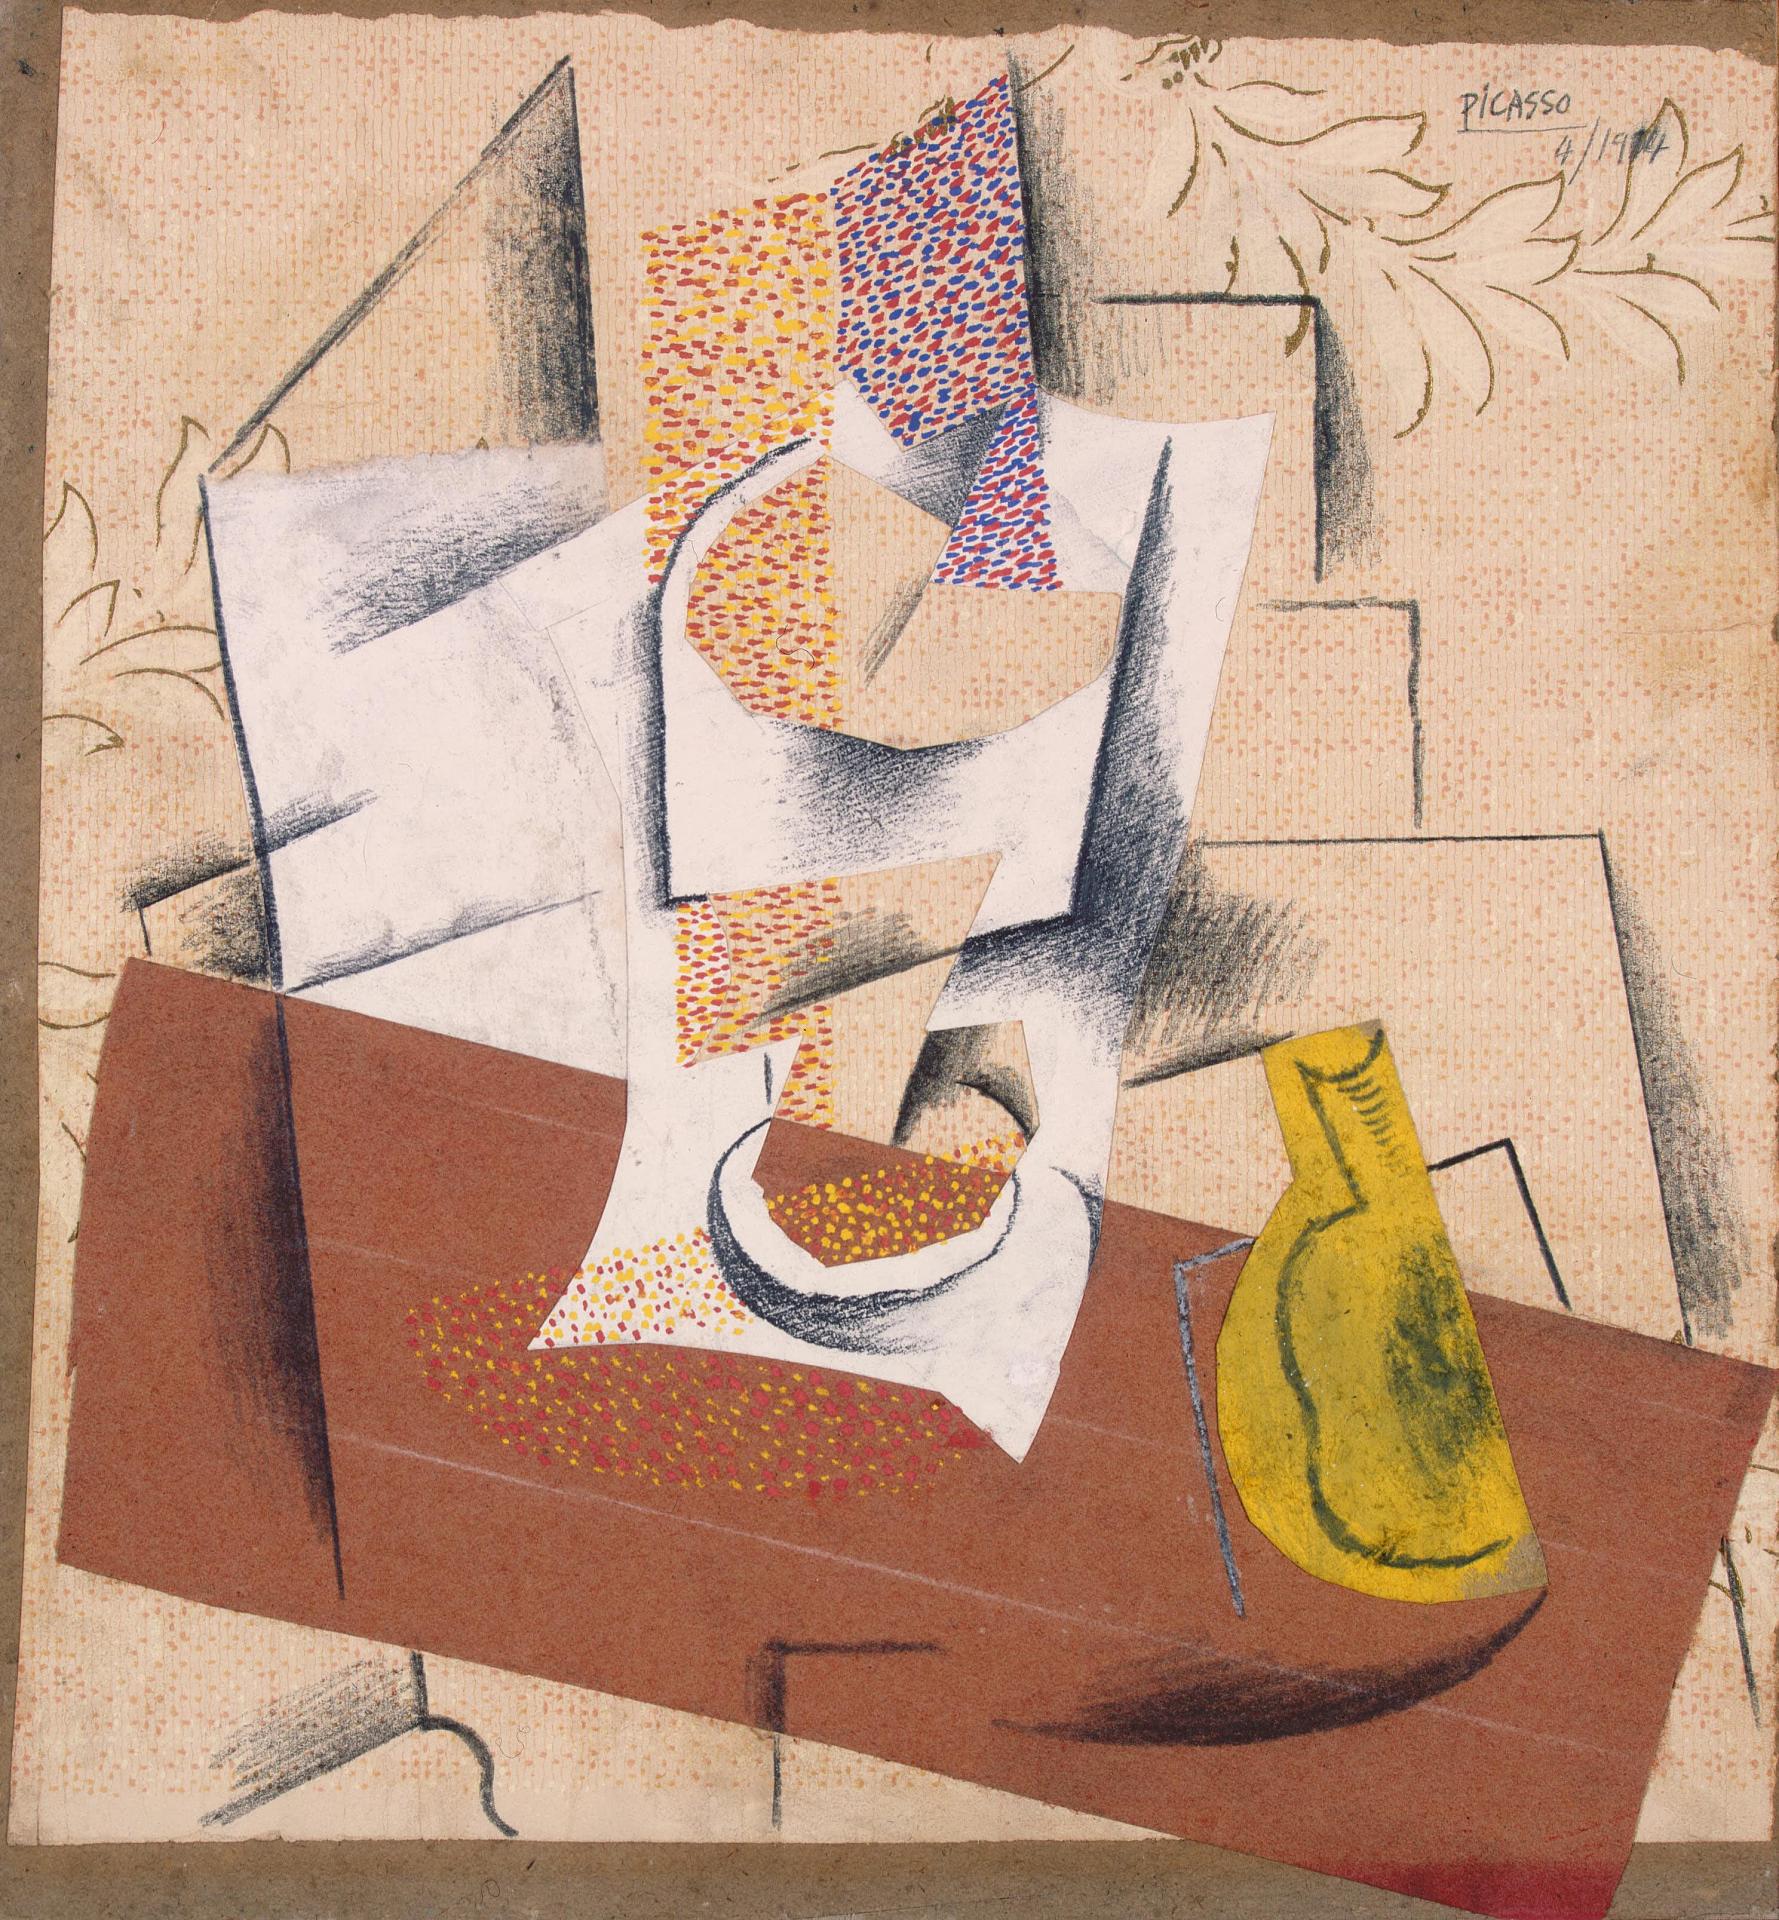 Composition with a Sliced Pear (1914) Signed Pablo Picasso - 17" x 22" Fine Art Print